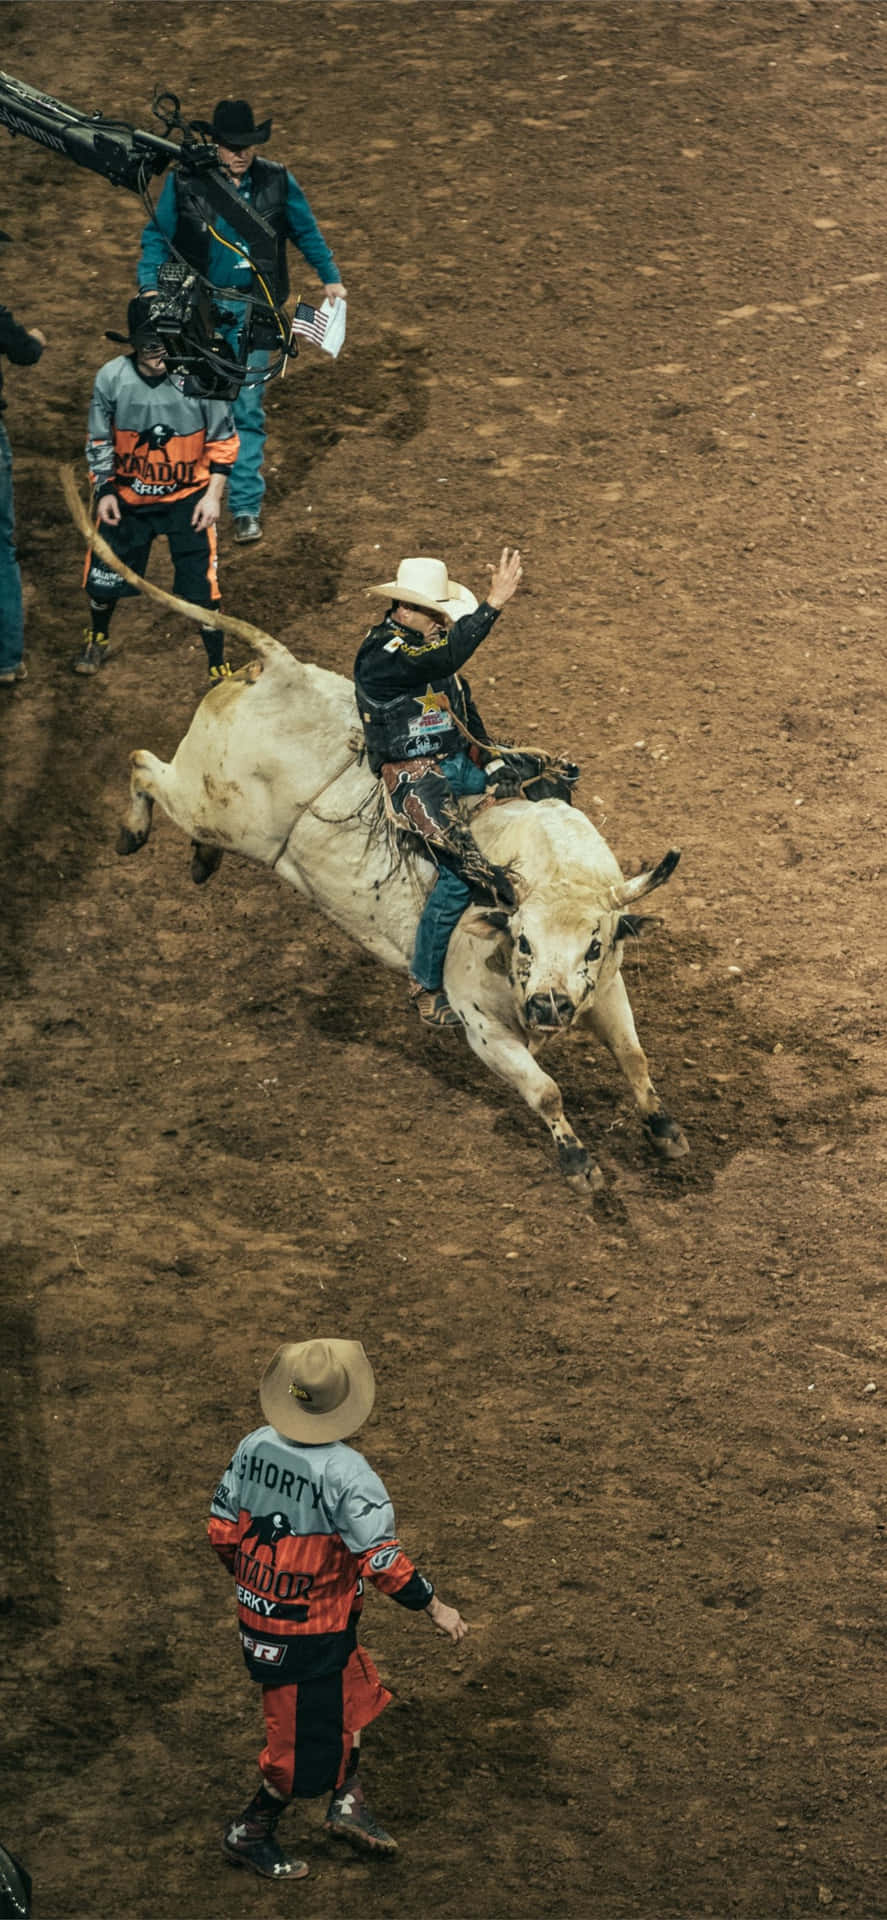 Professional bull rider competing at an event